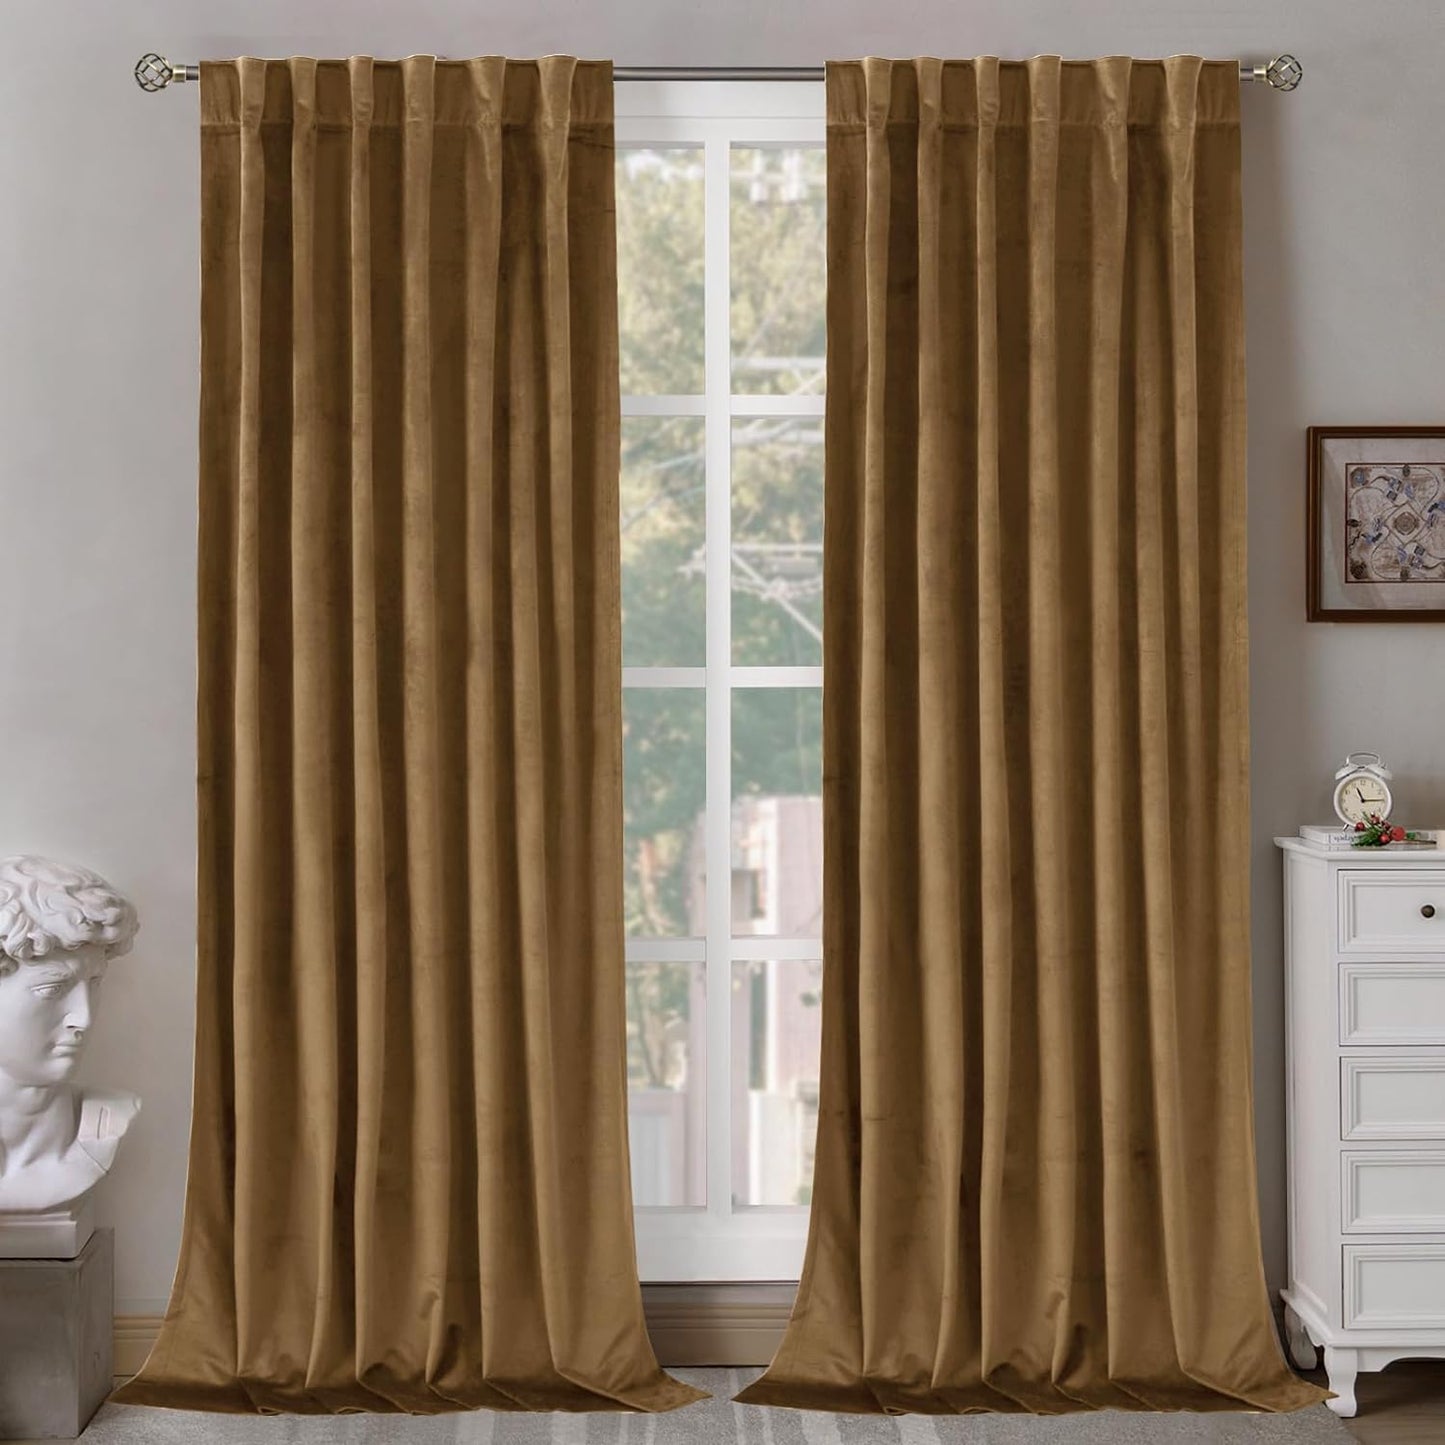 Bgment Grey Velvet Curtains 108 Inches Long for Living Room, Thermal Insulated Room Darkening Curtains Drapes Window Treatment with Back Tab and Rod Pocket, Set of 2 Panels, 52 X 108 Inch  BGment Bronze Brown 52W X 120L 